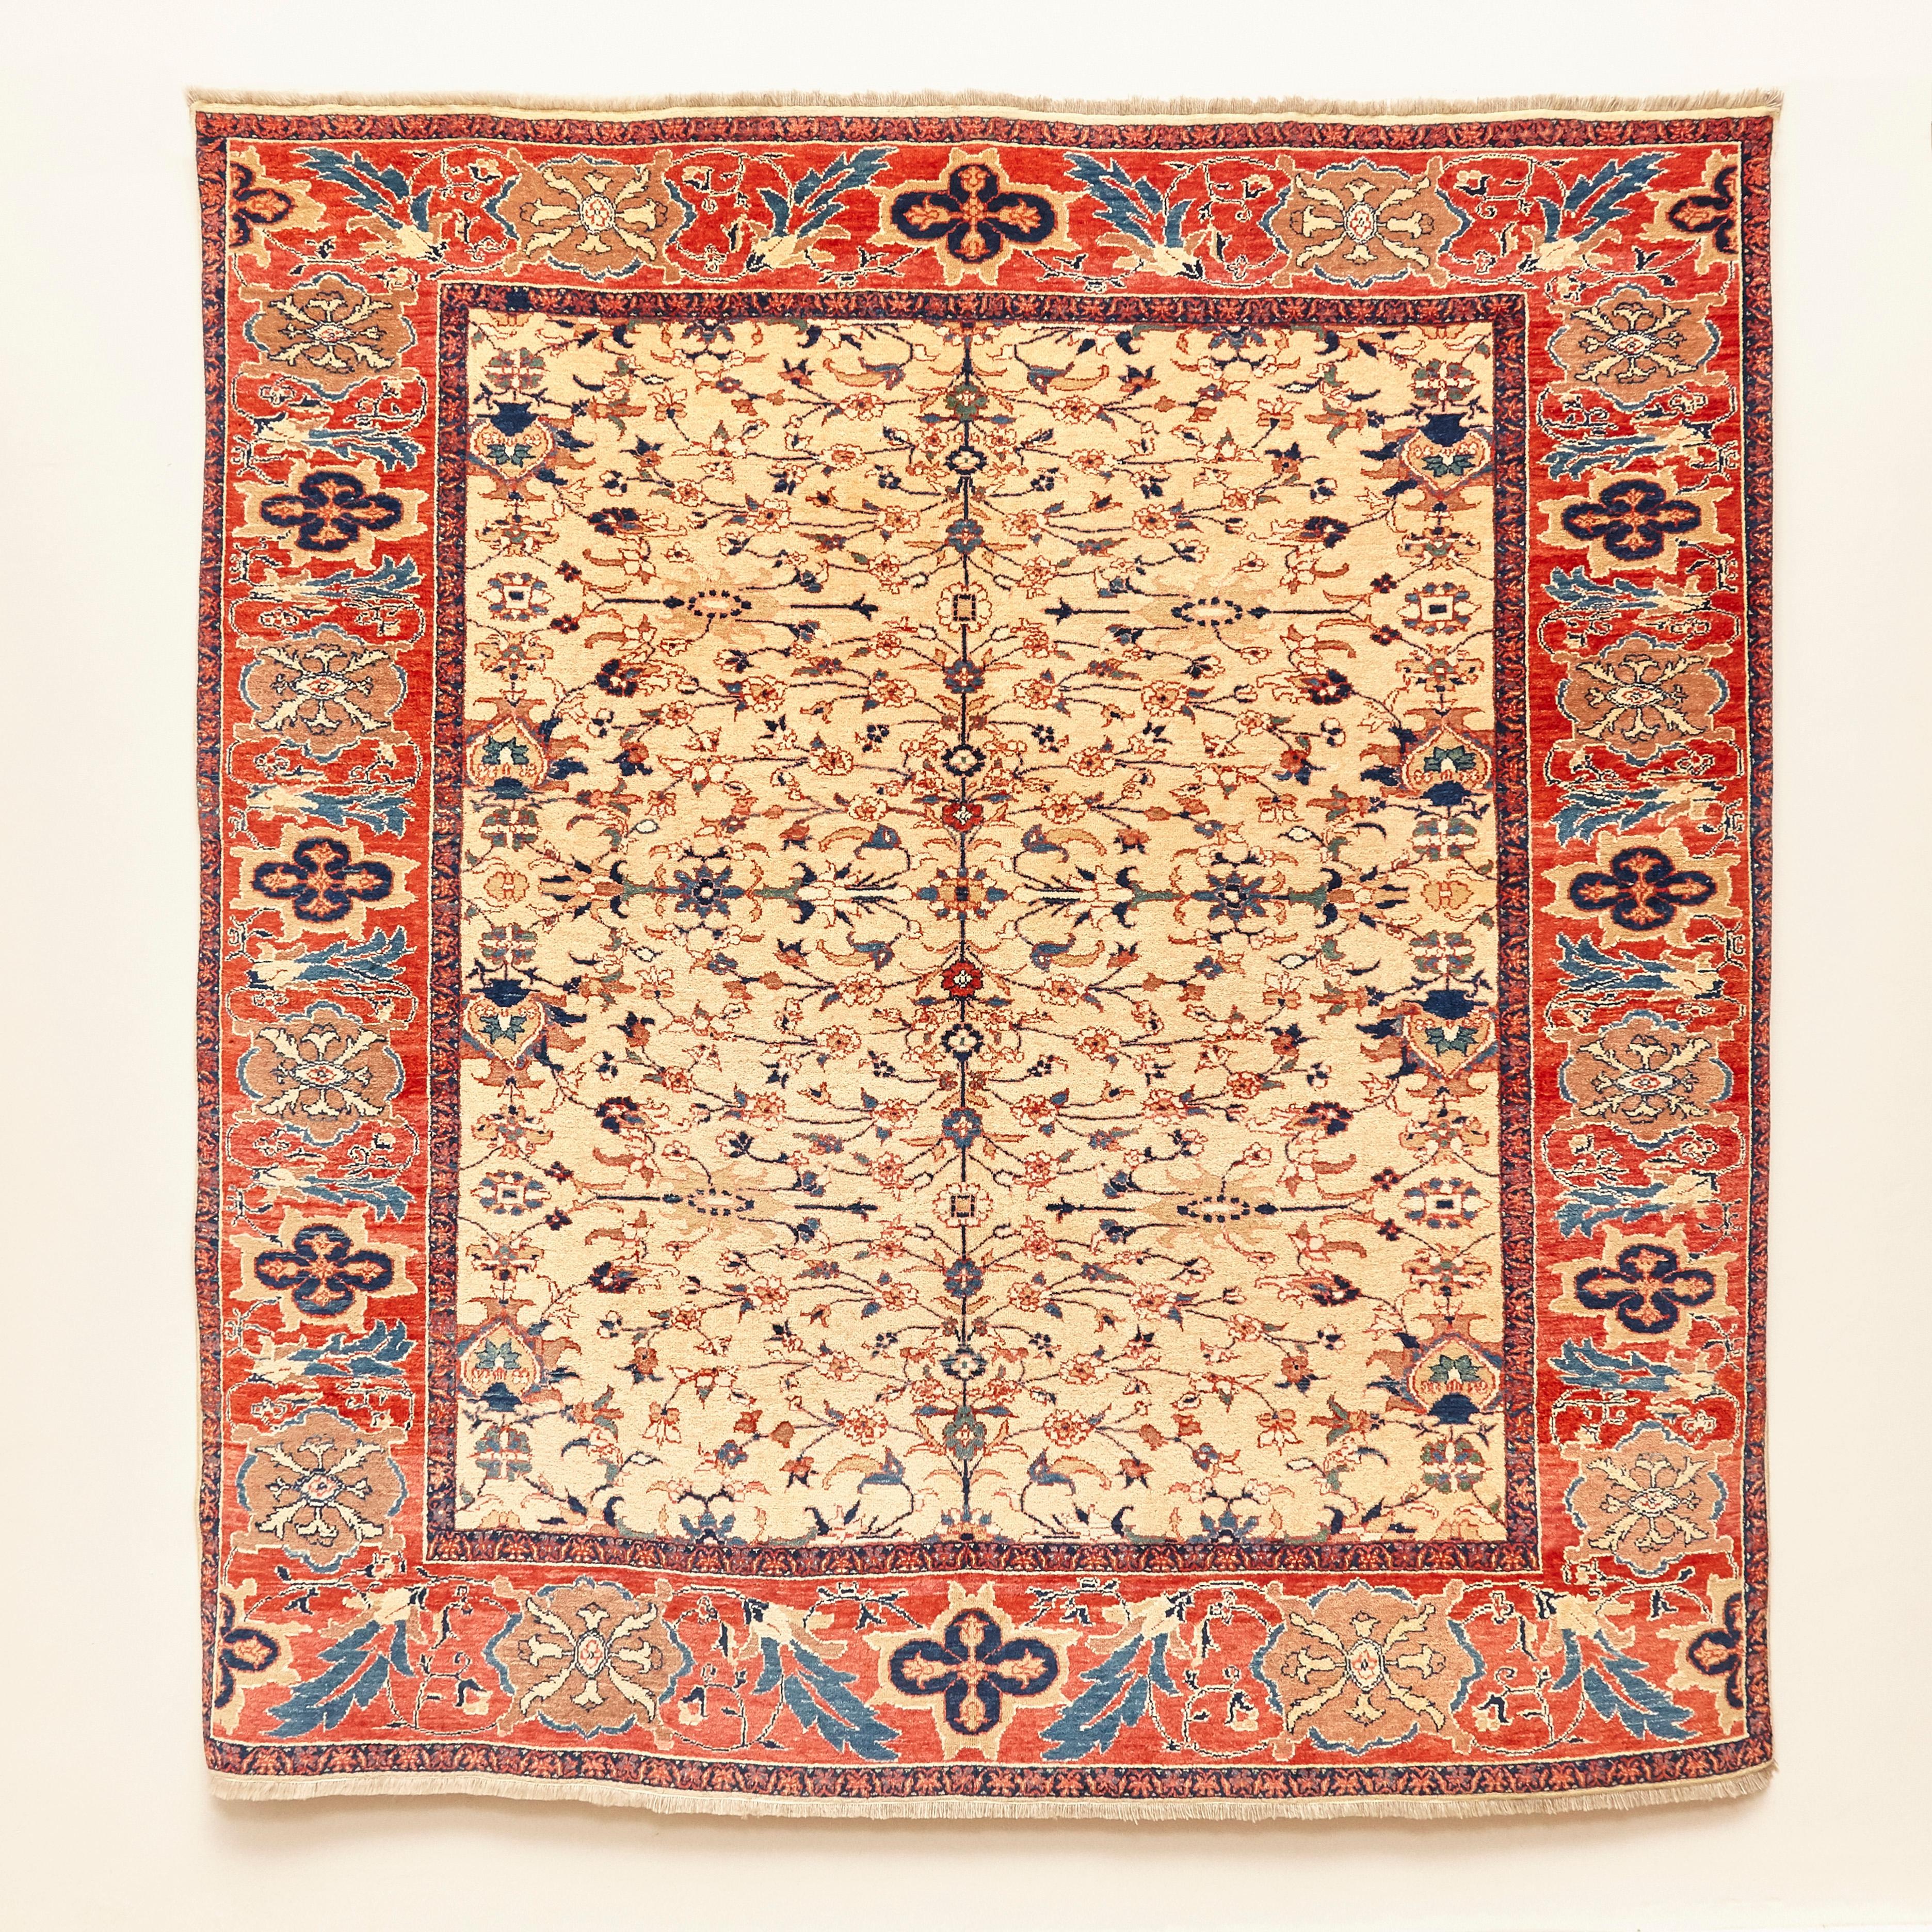 Antique Caucas Armenia Leshghi hand knotted wool rug, circa 2000.

In original condition, with wear consistent with age and use.

Measures: 107 x 183
13421.